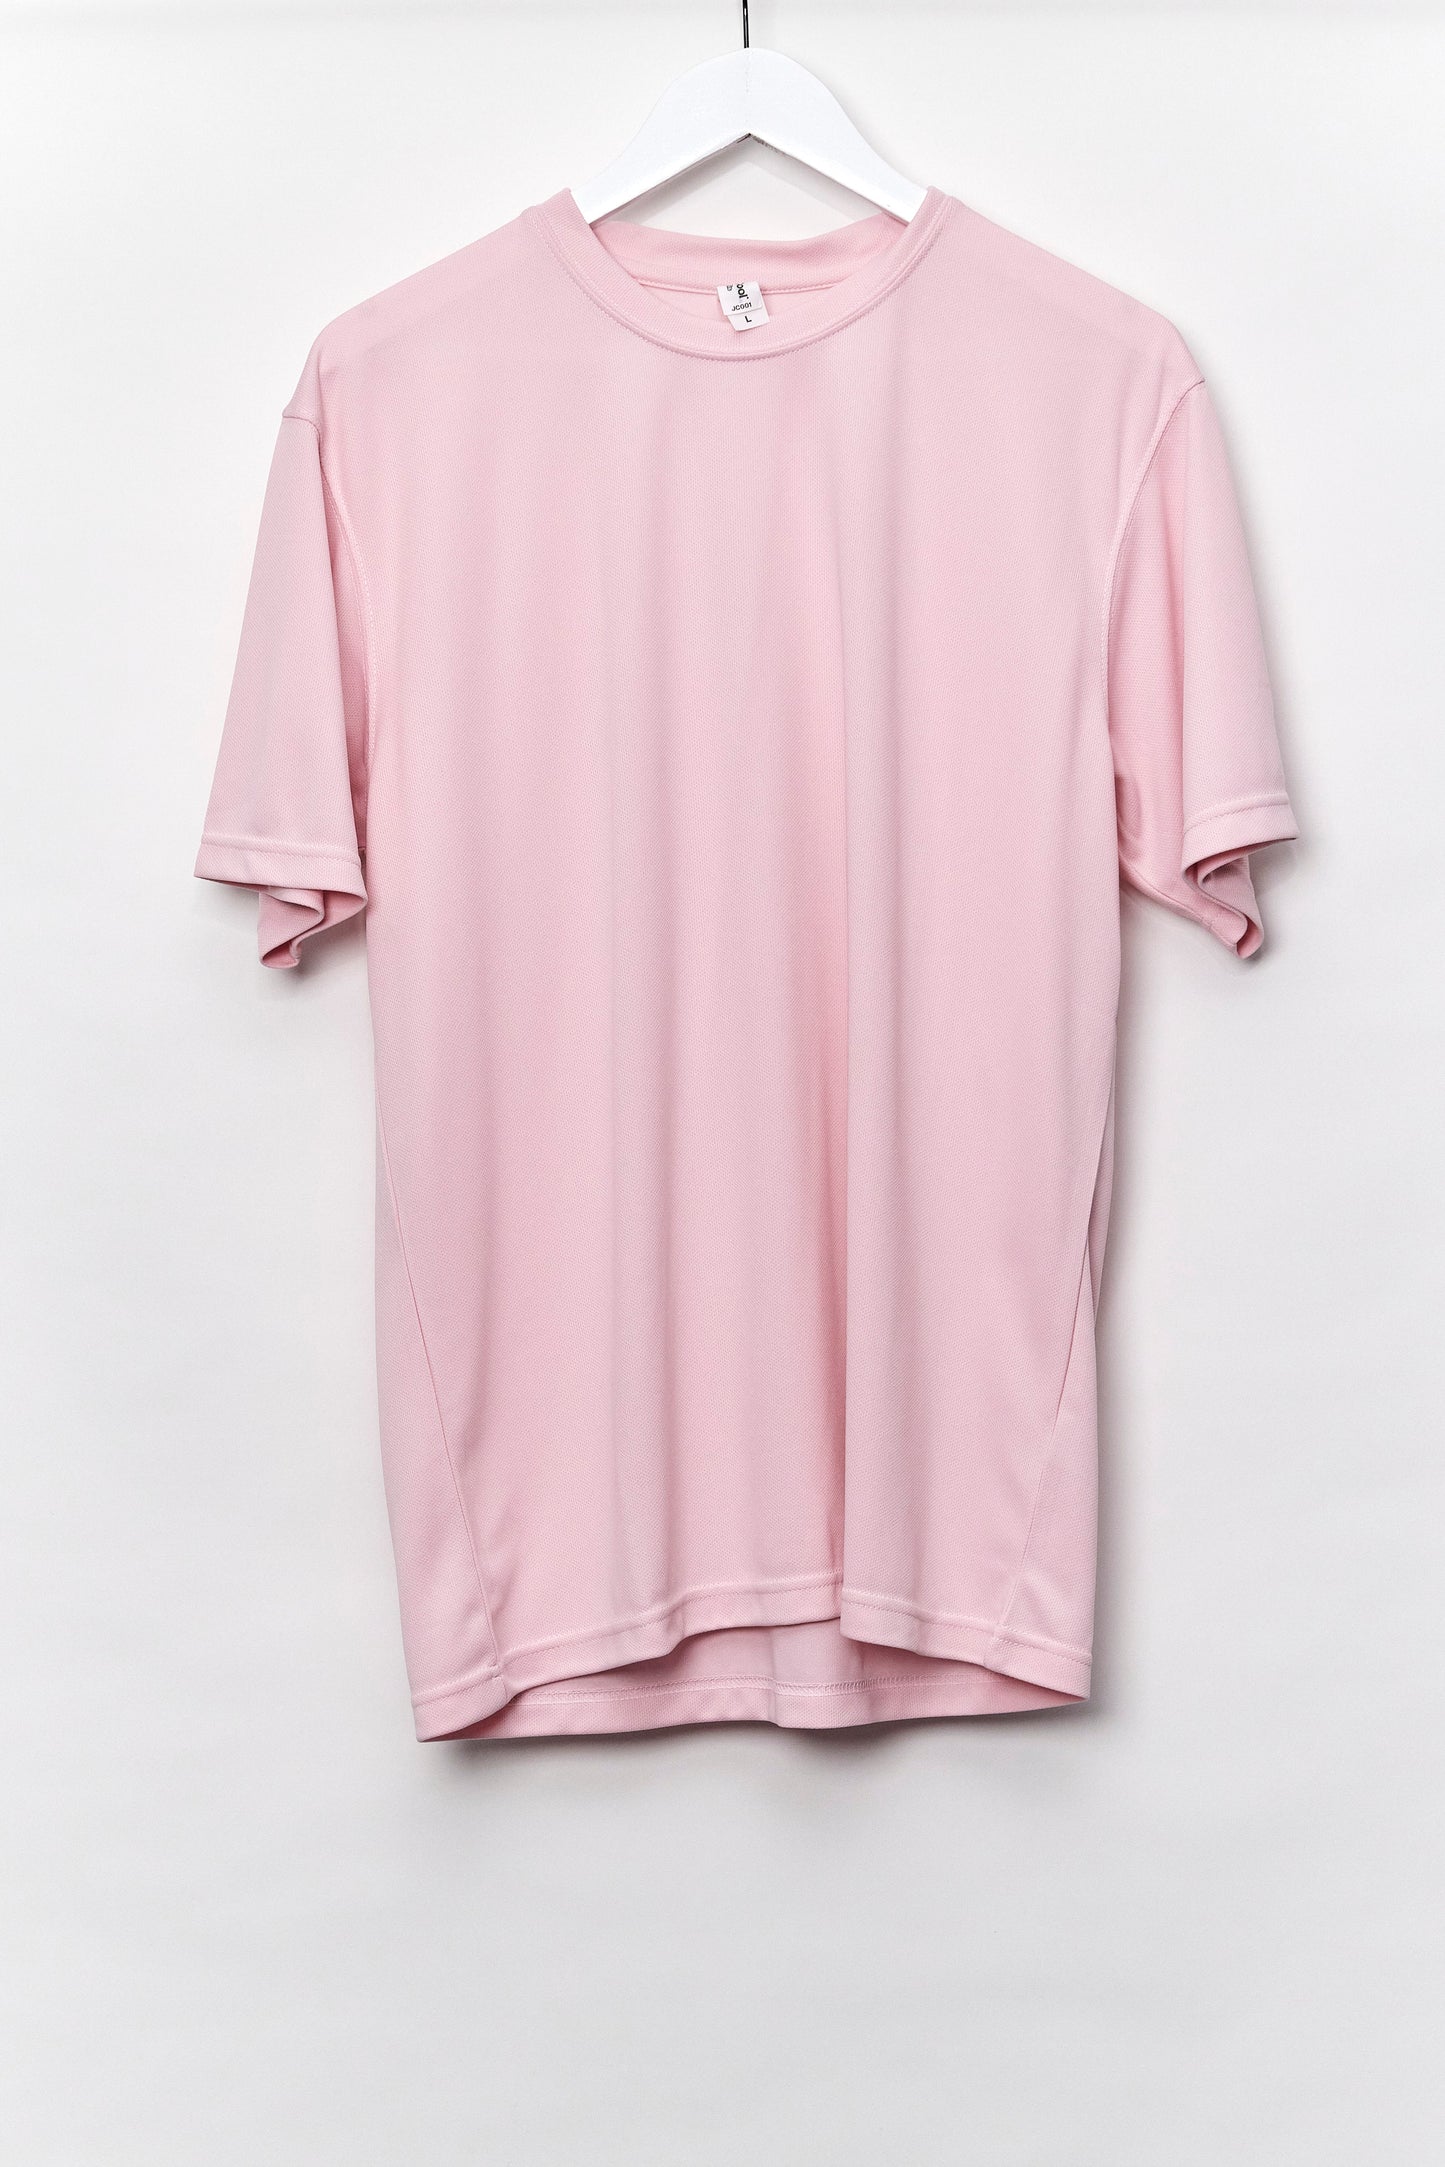 Mens Pink Sport Top size Large